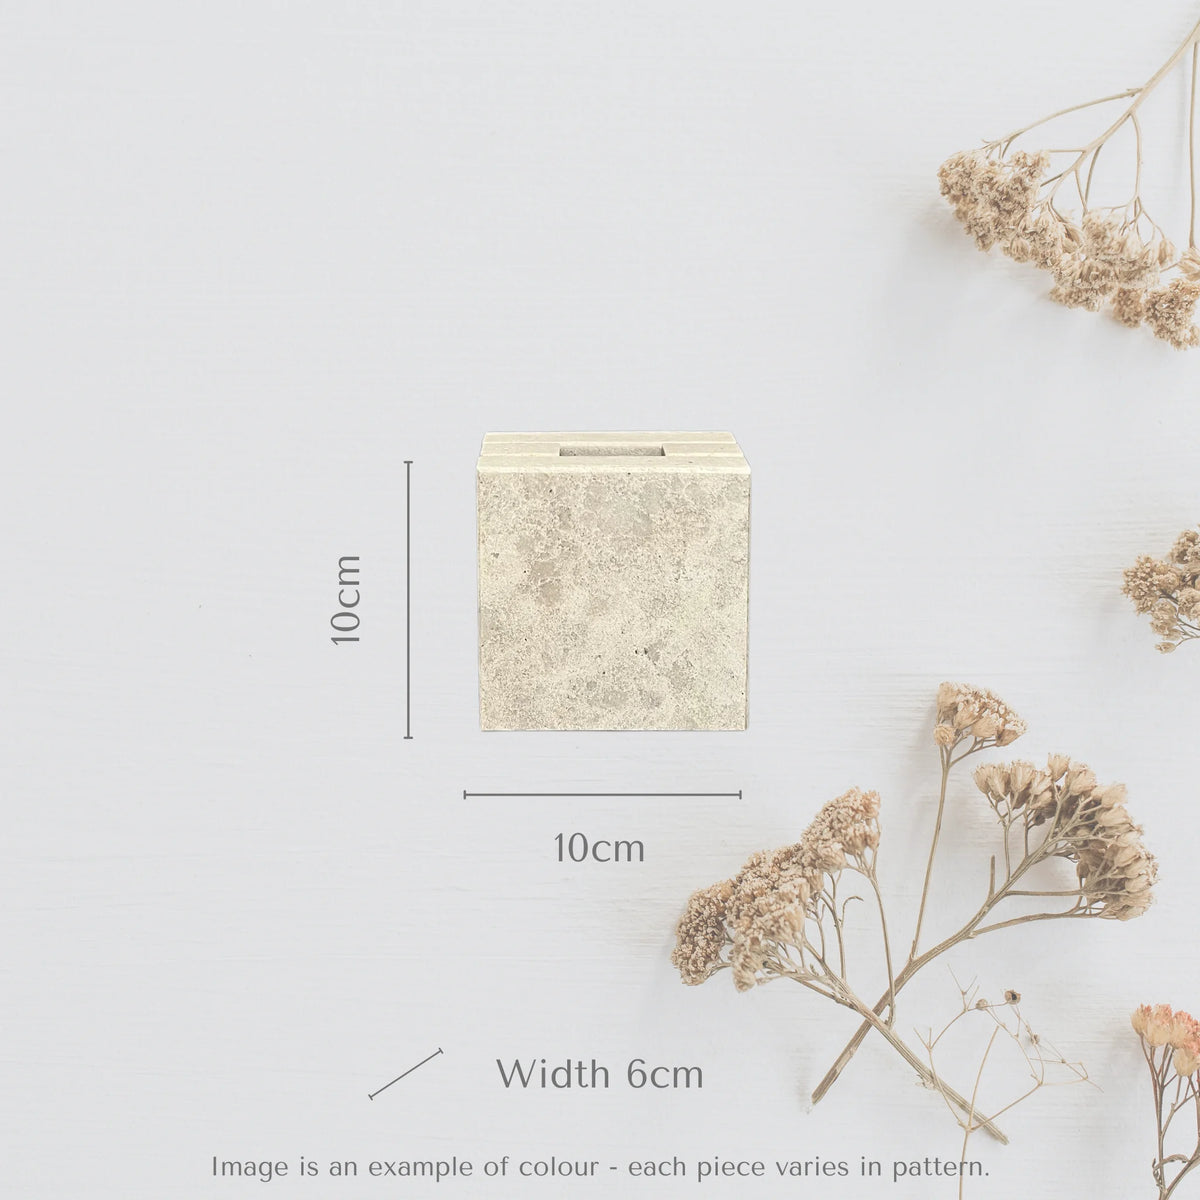 Showing measurements for solid stone mini vase in Caesarstone Primordia with mini dried flower posy. This is the gift to buy when you think what to buy for someone that has everything.